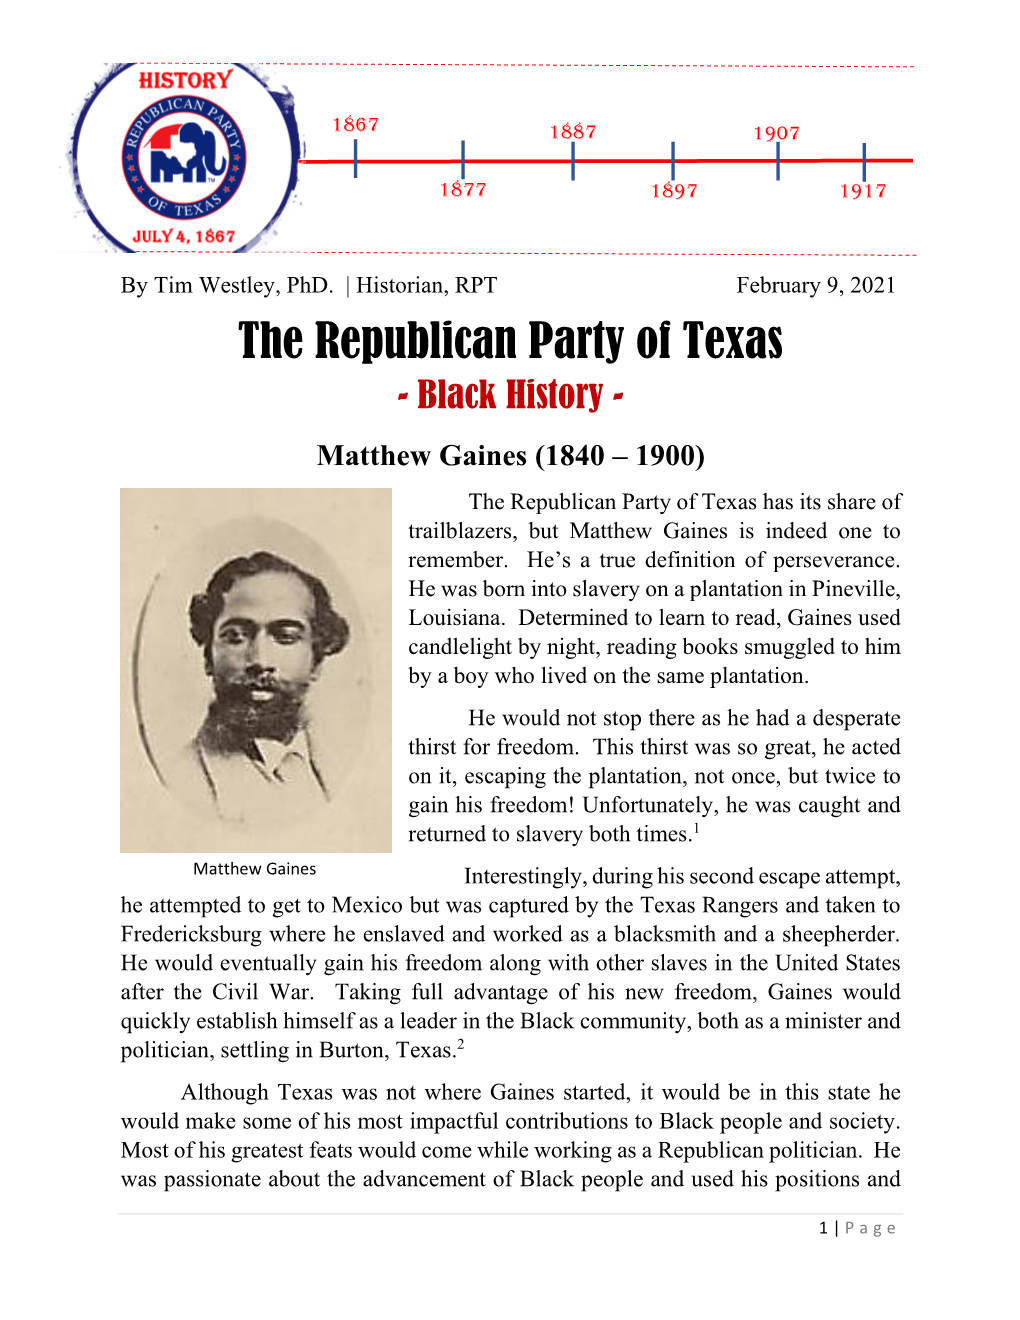 Matthew Gaines (1840 – 1900) the Republican Party of Texas Has Its Share of Trailblazers, but Matthew Gaines Is Indeed One to Remember